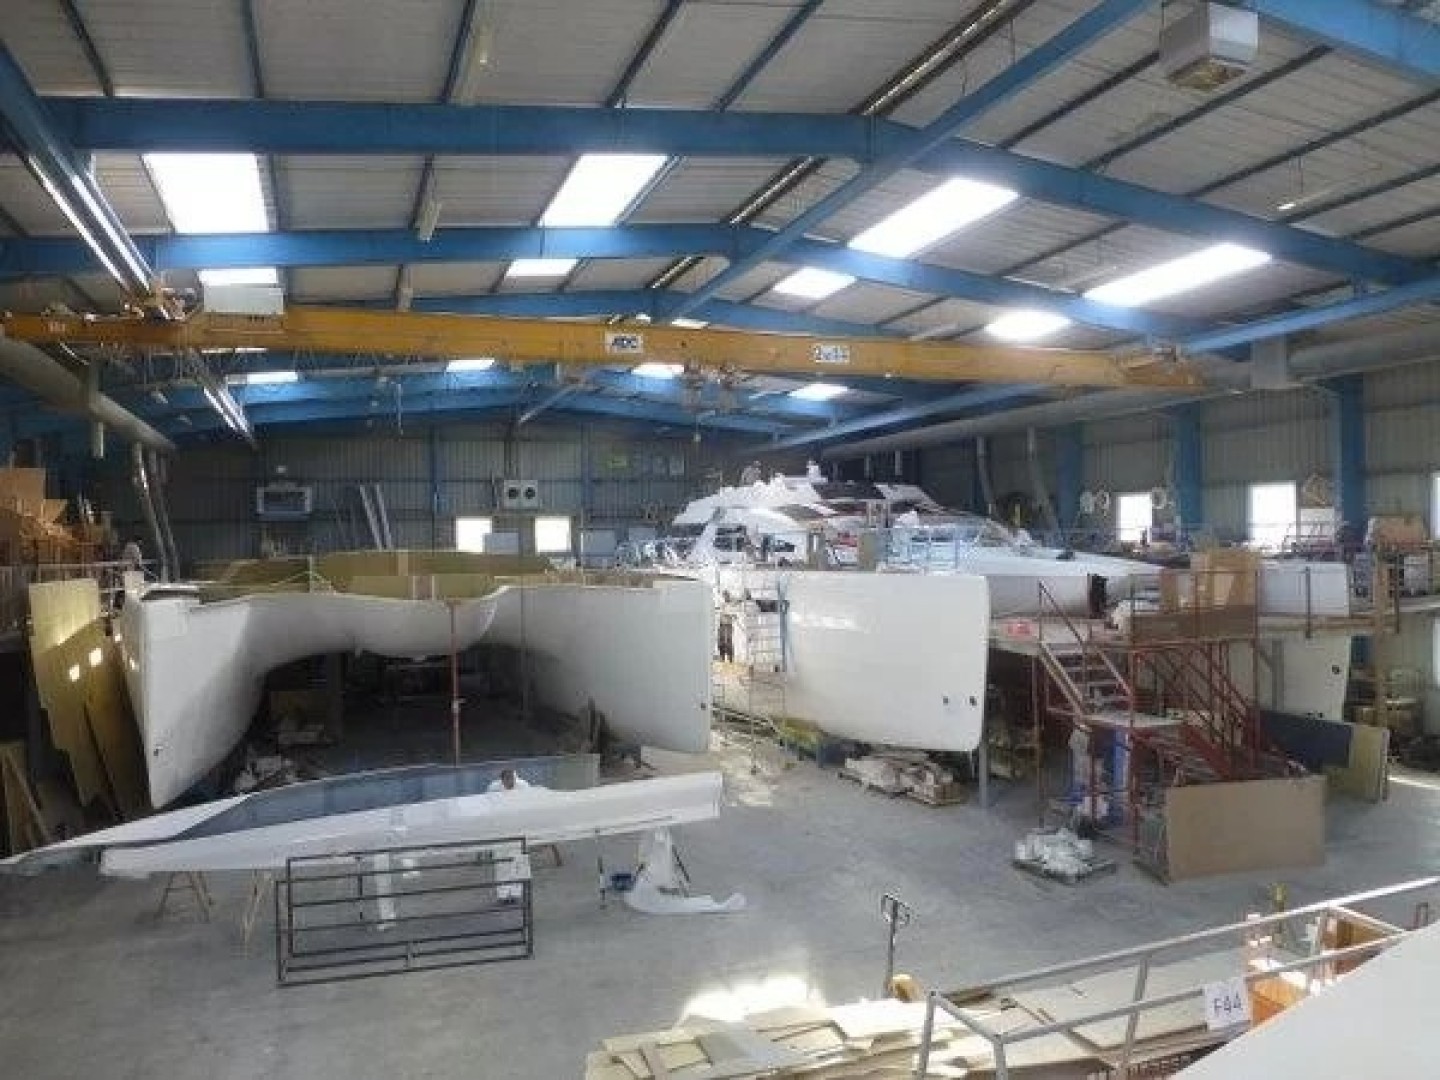 Hanse Yachts receives a put option to sell Privilège Marine